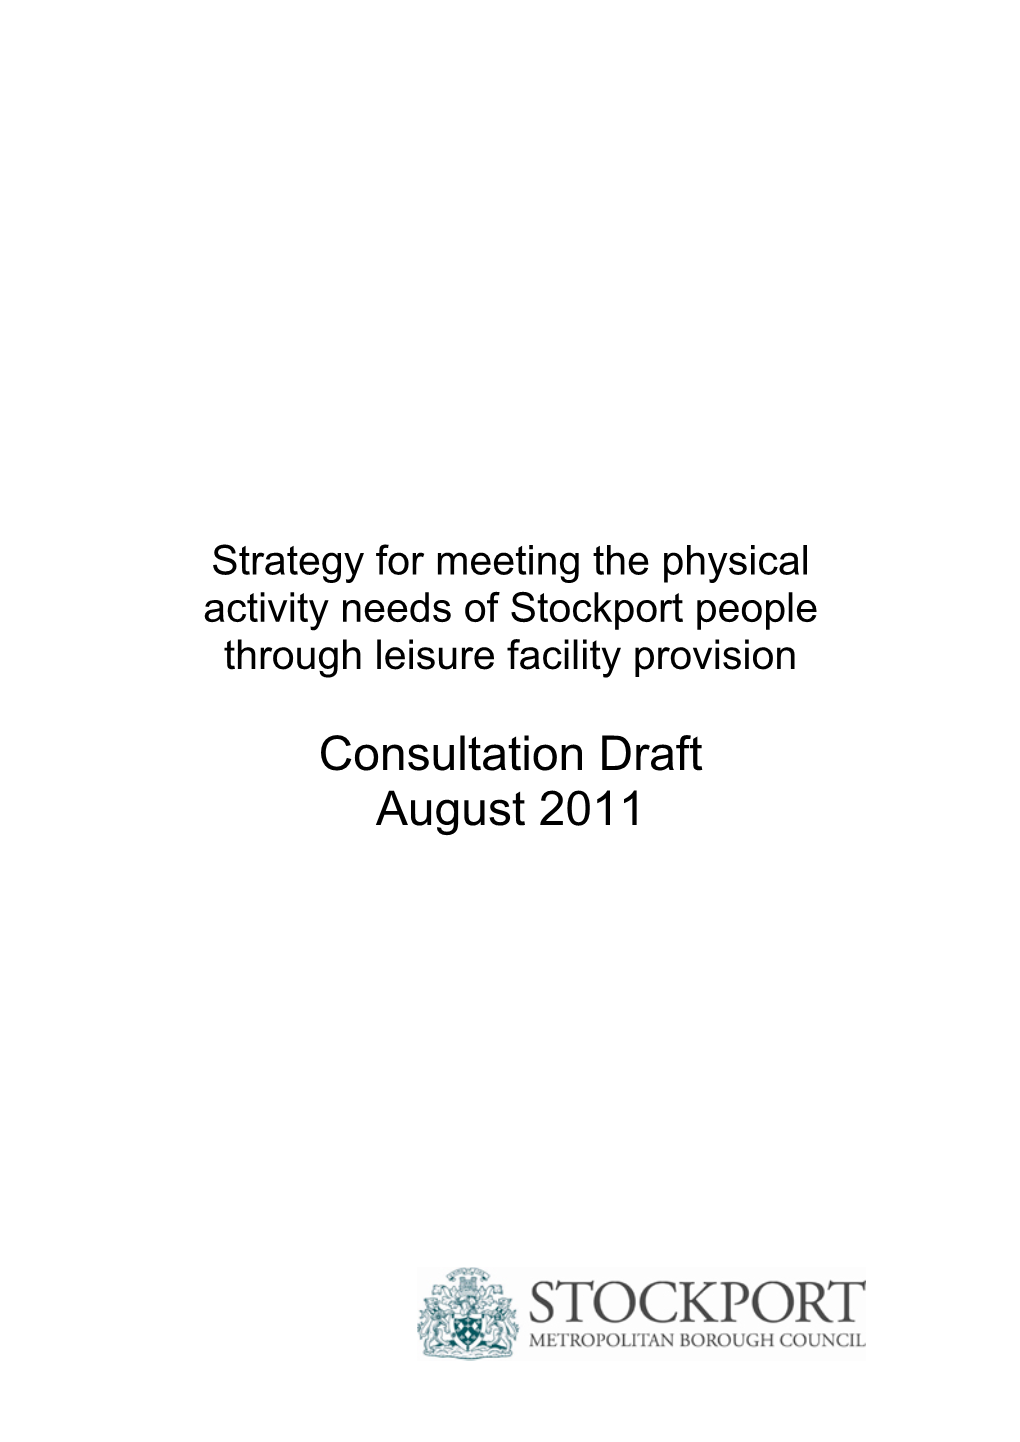 Strategy for Meeting the Physical Activity Needs of Stockport People Through Leisure Facility Provision